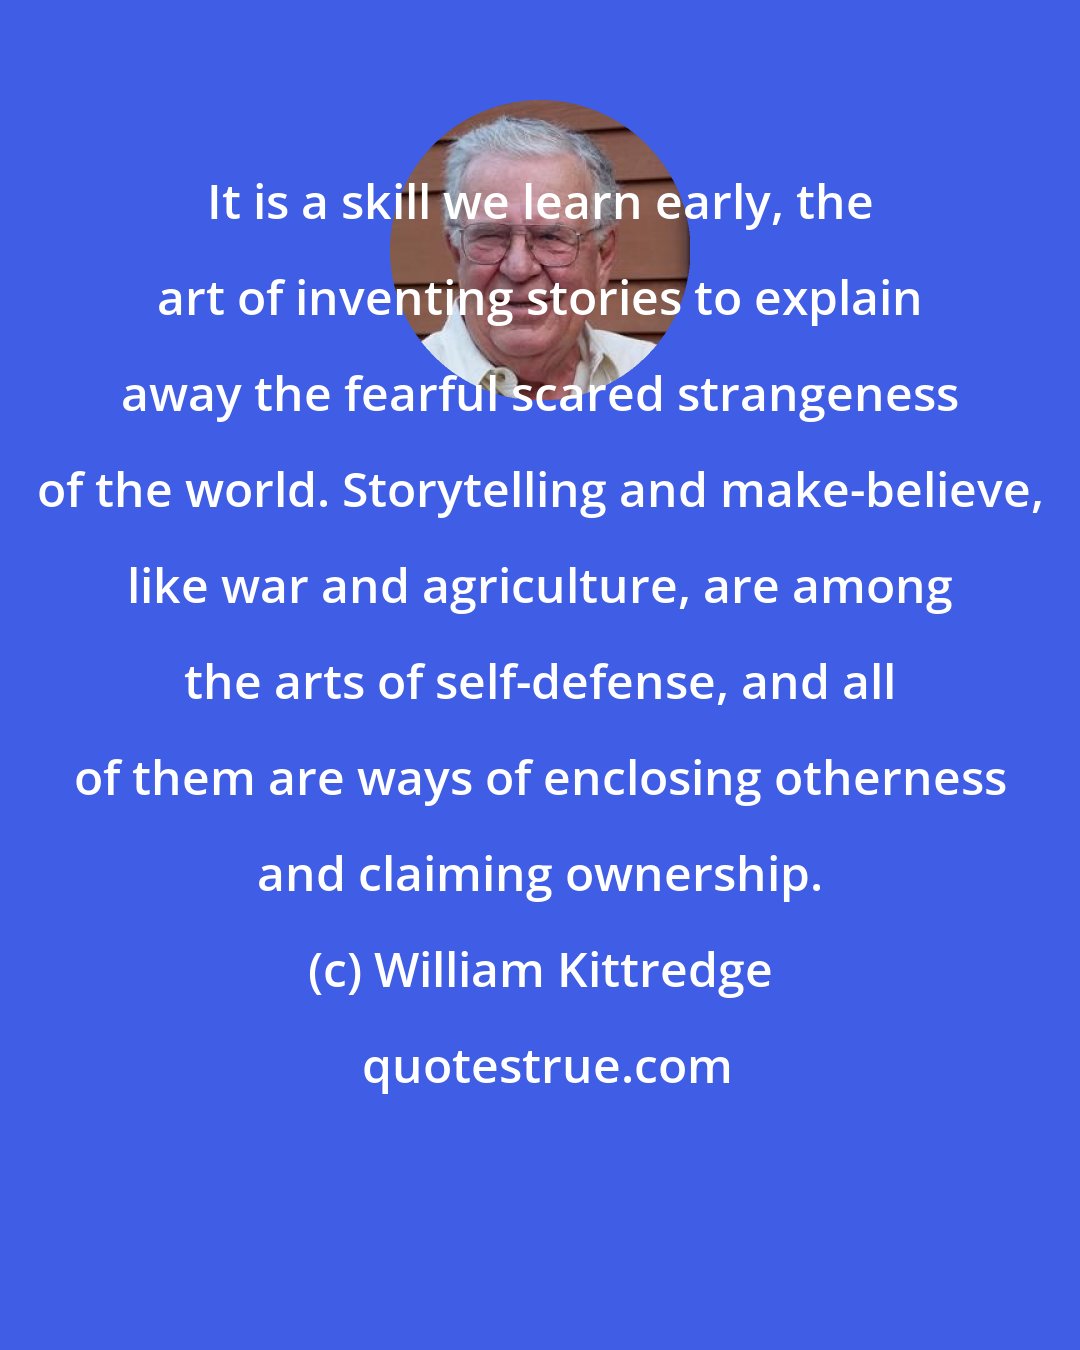 William Kittredge: It is a skill we learn early, the art of inventing stories to explain away the fearful scared strangeness of the world. Storytelling and make-believe, like war and agriculture, are among the arts of self-defense, and all of them are ways of enclosing otherness and claiming ownership.